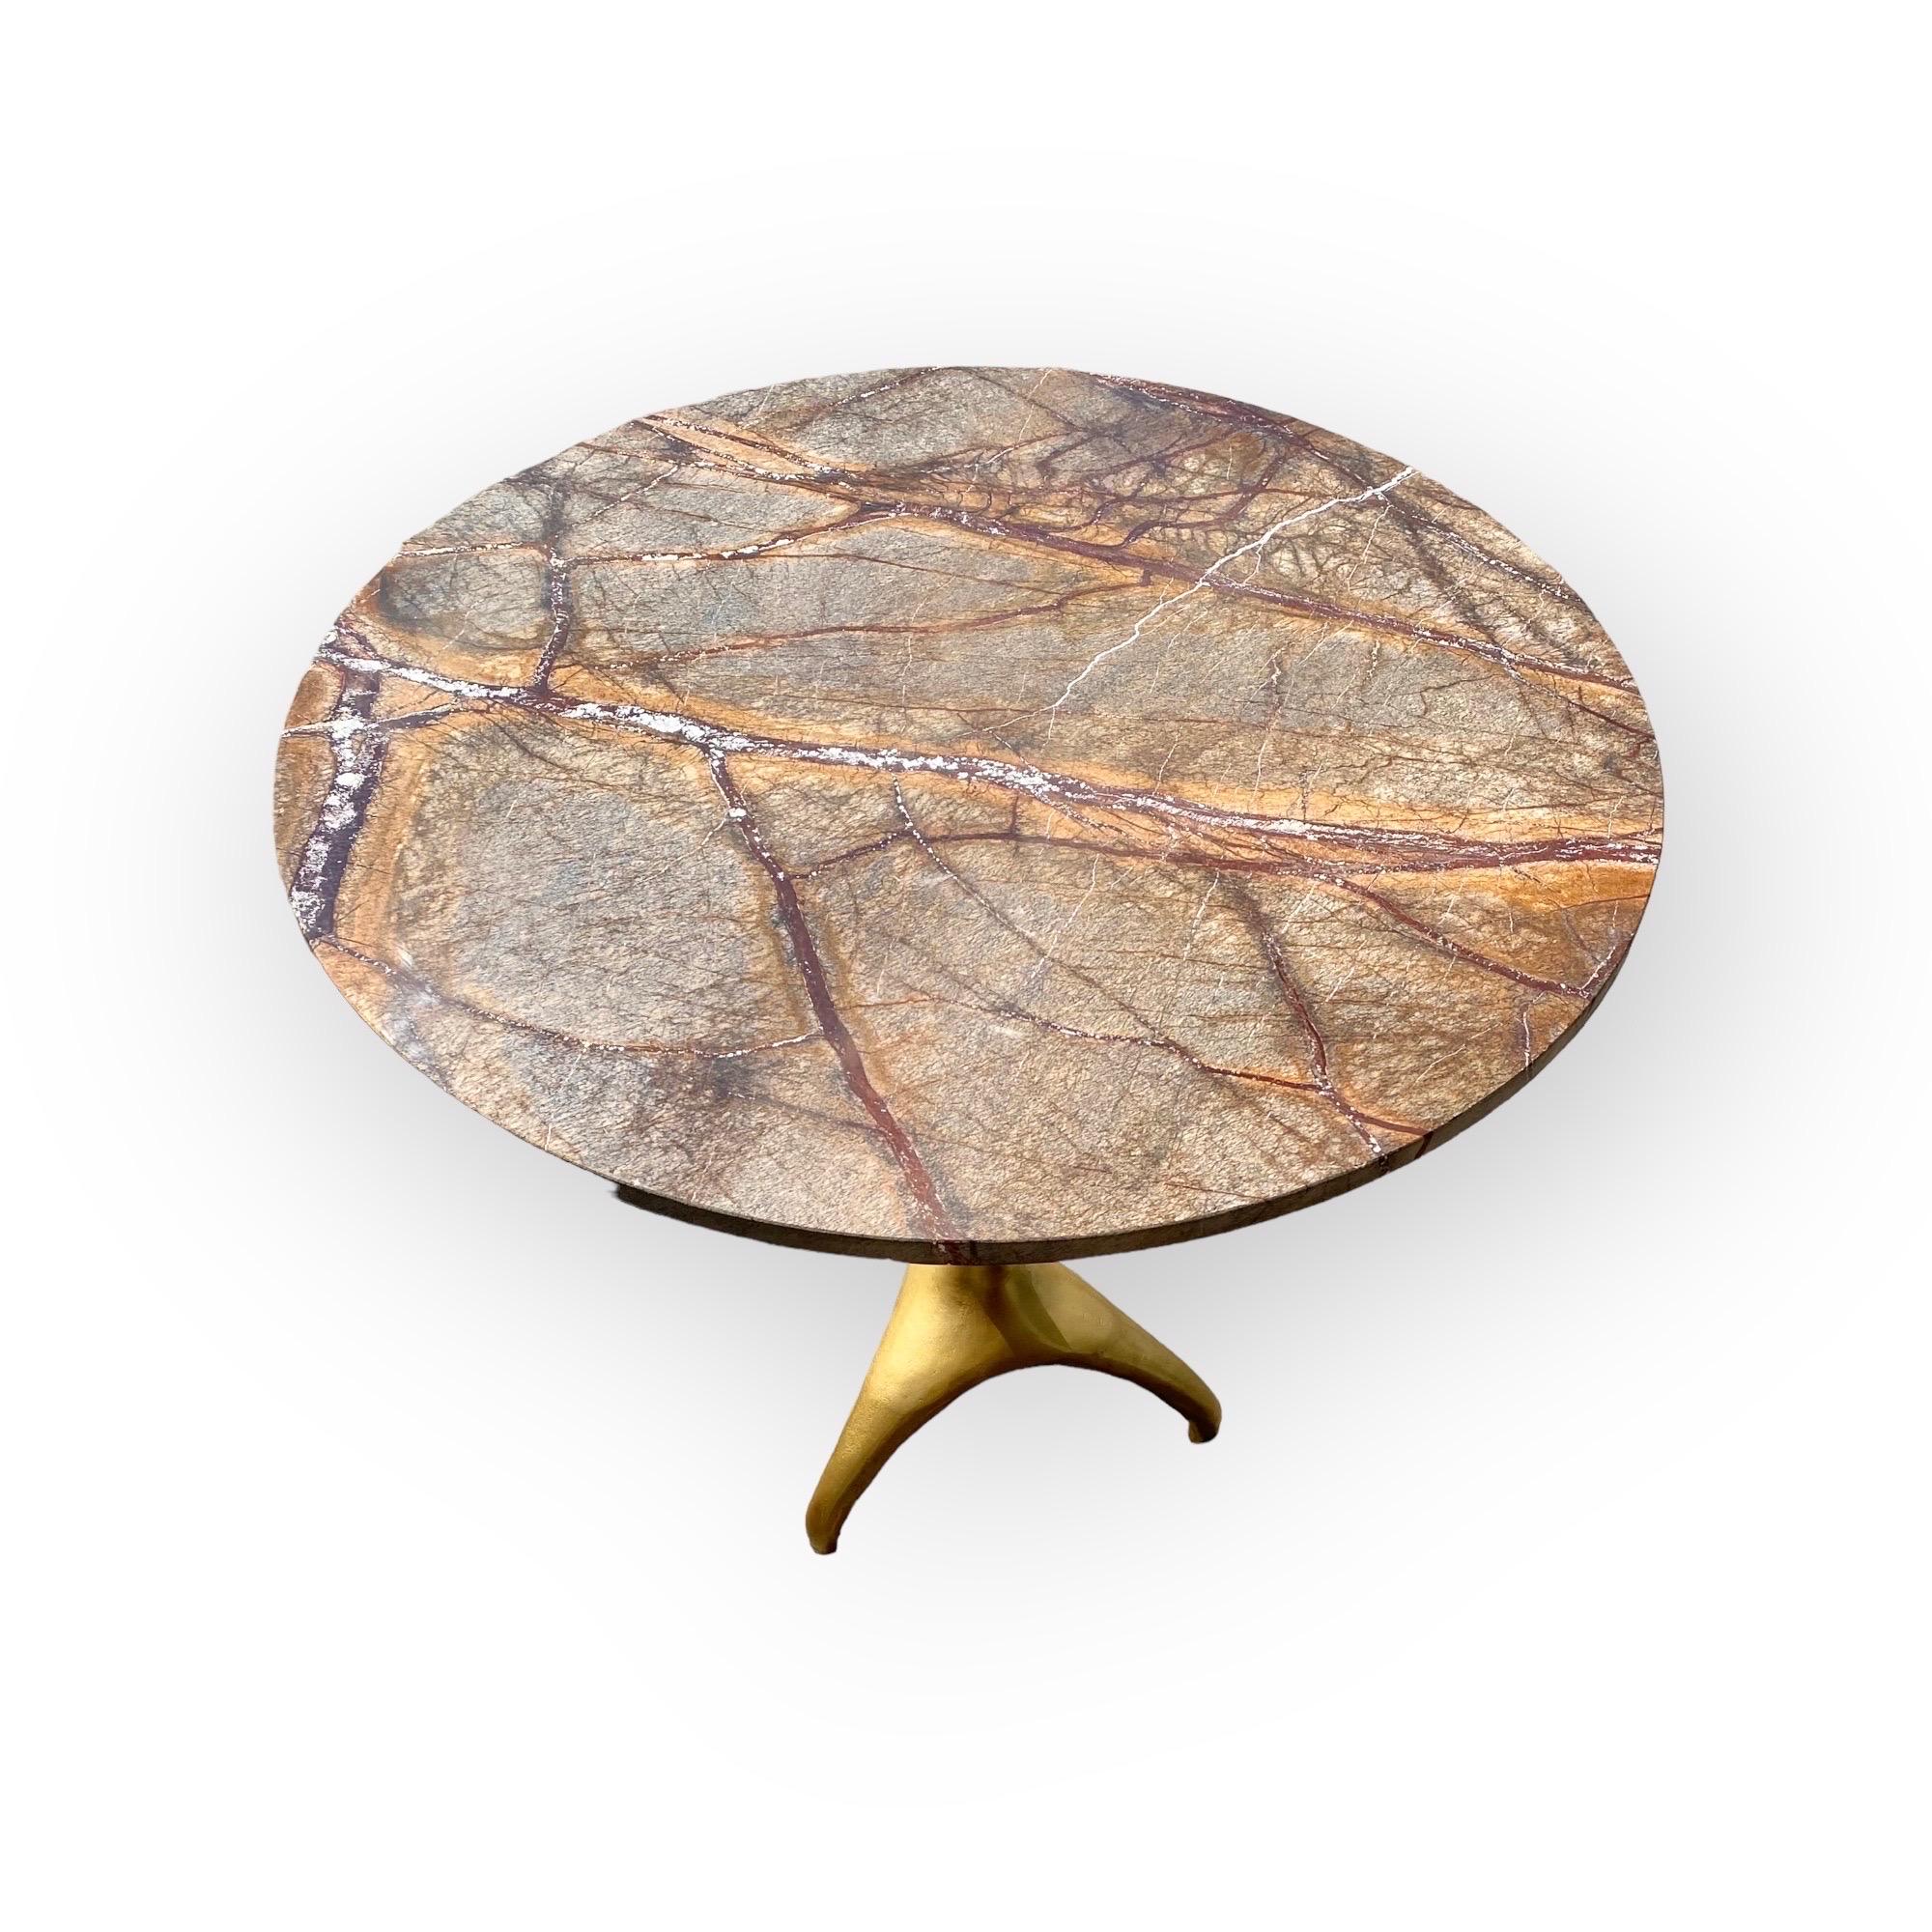 Polished A Modern, Eclectic Bidasar Marble And Brass Clad Iron Pedestal Table